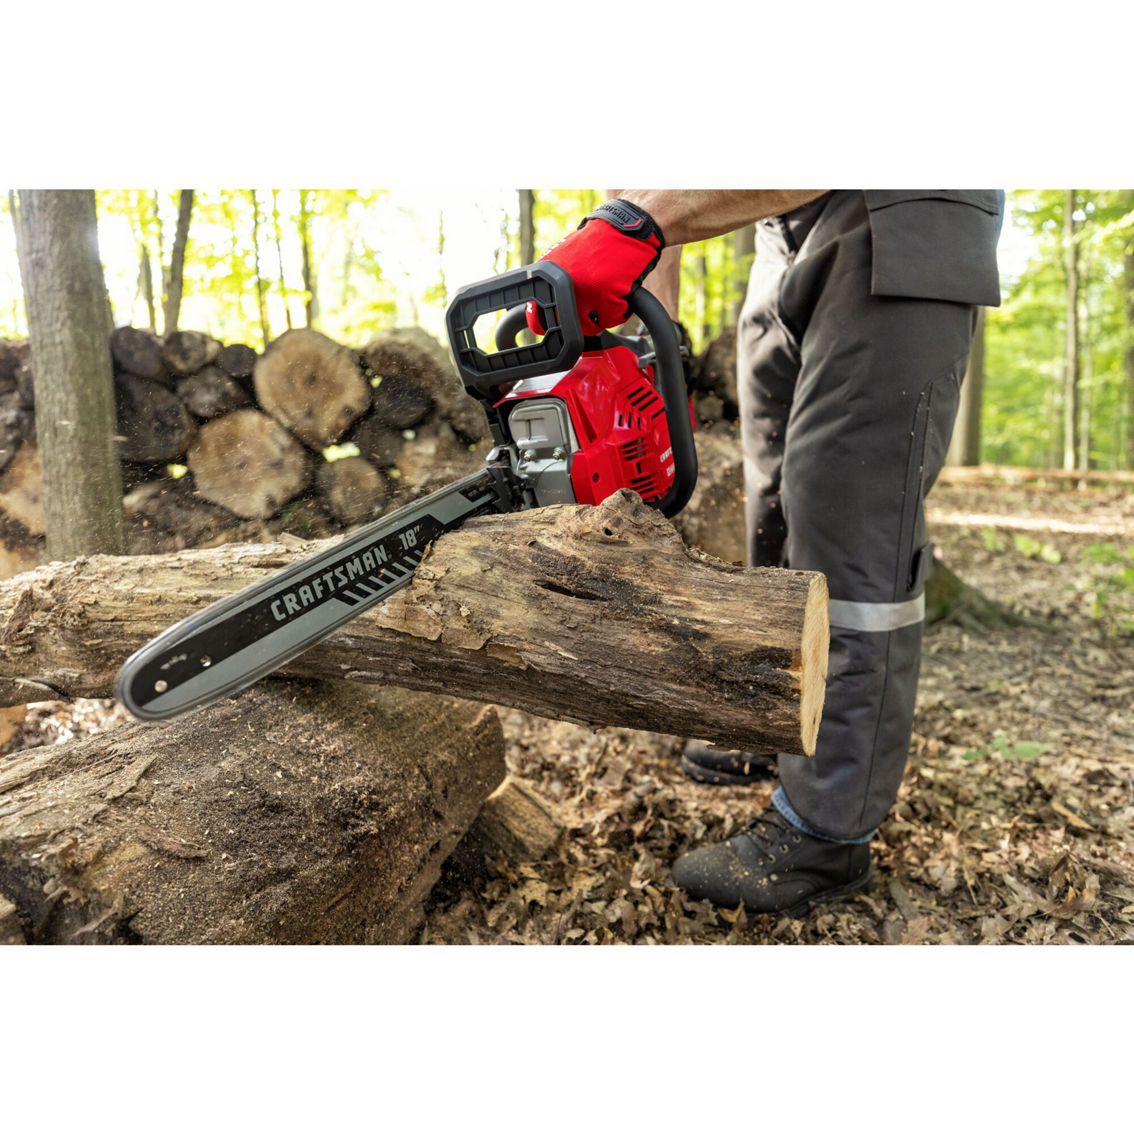 Craftsman 20-in. 46cc 2 Cycle Gas Chainsaw - Image 6 of 6